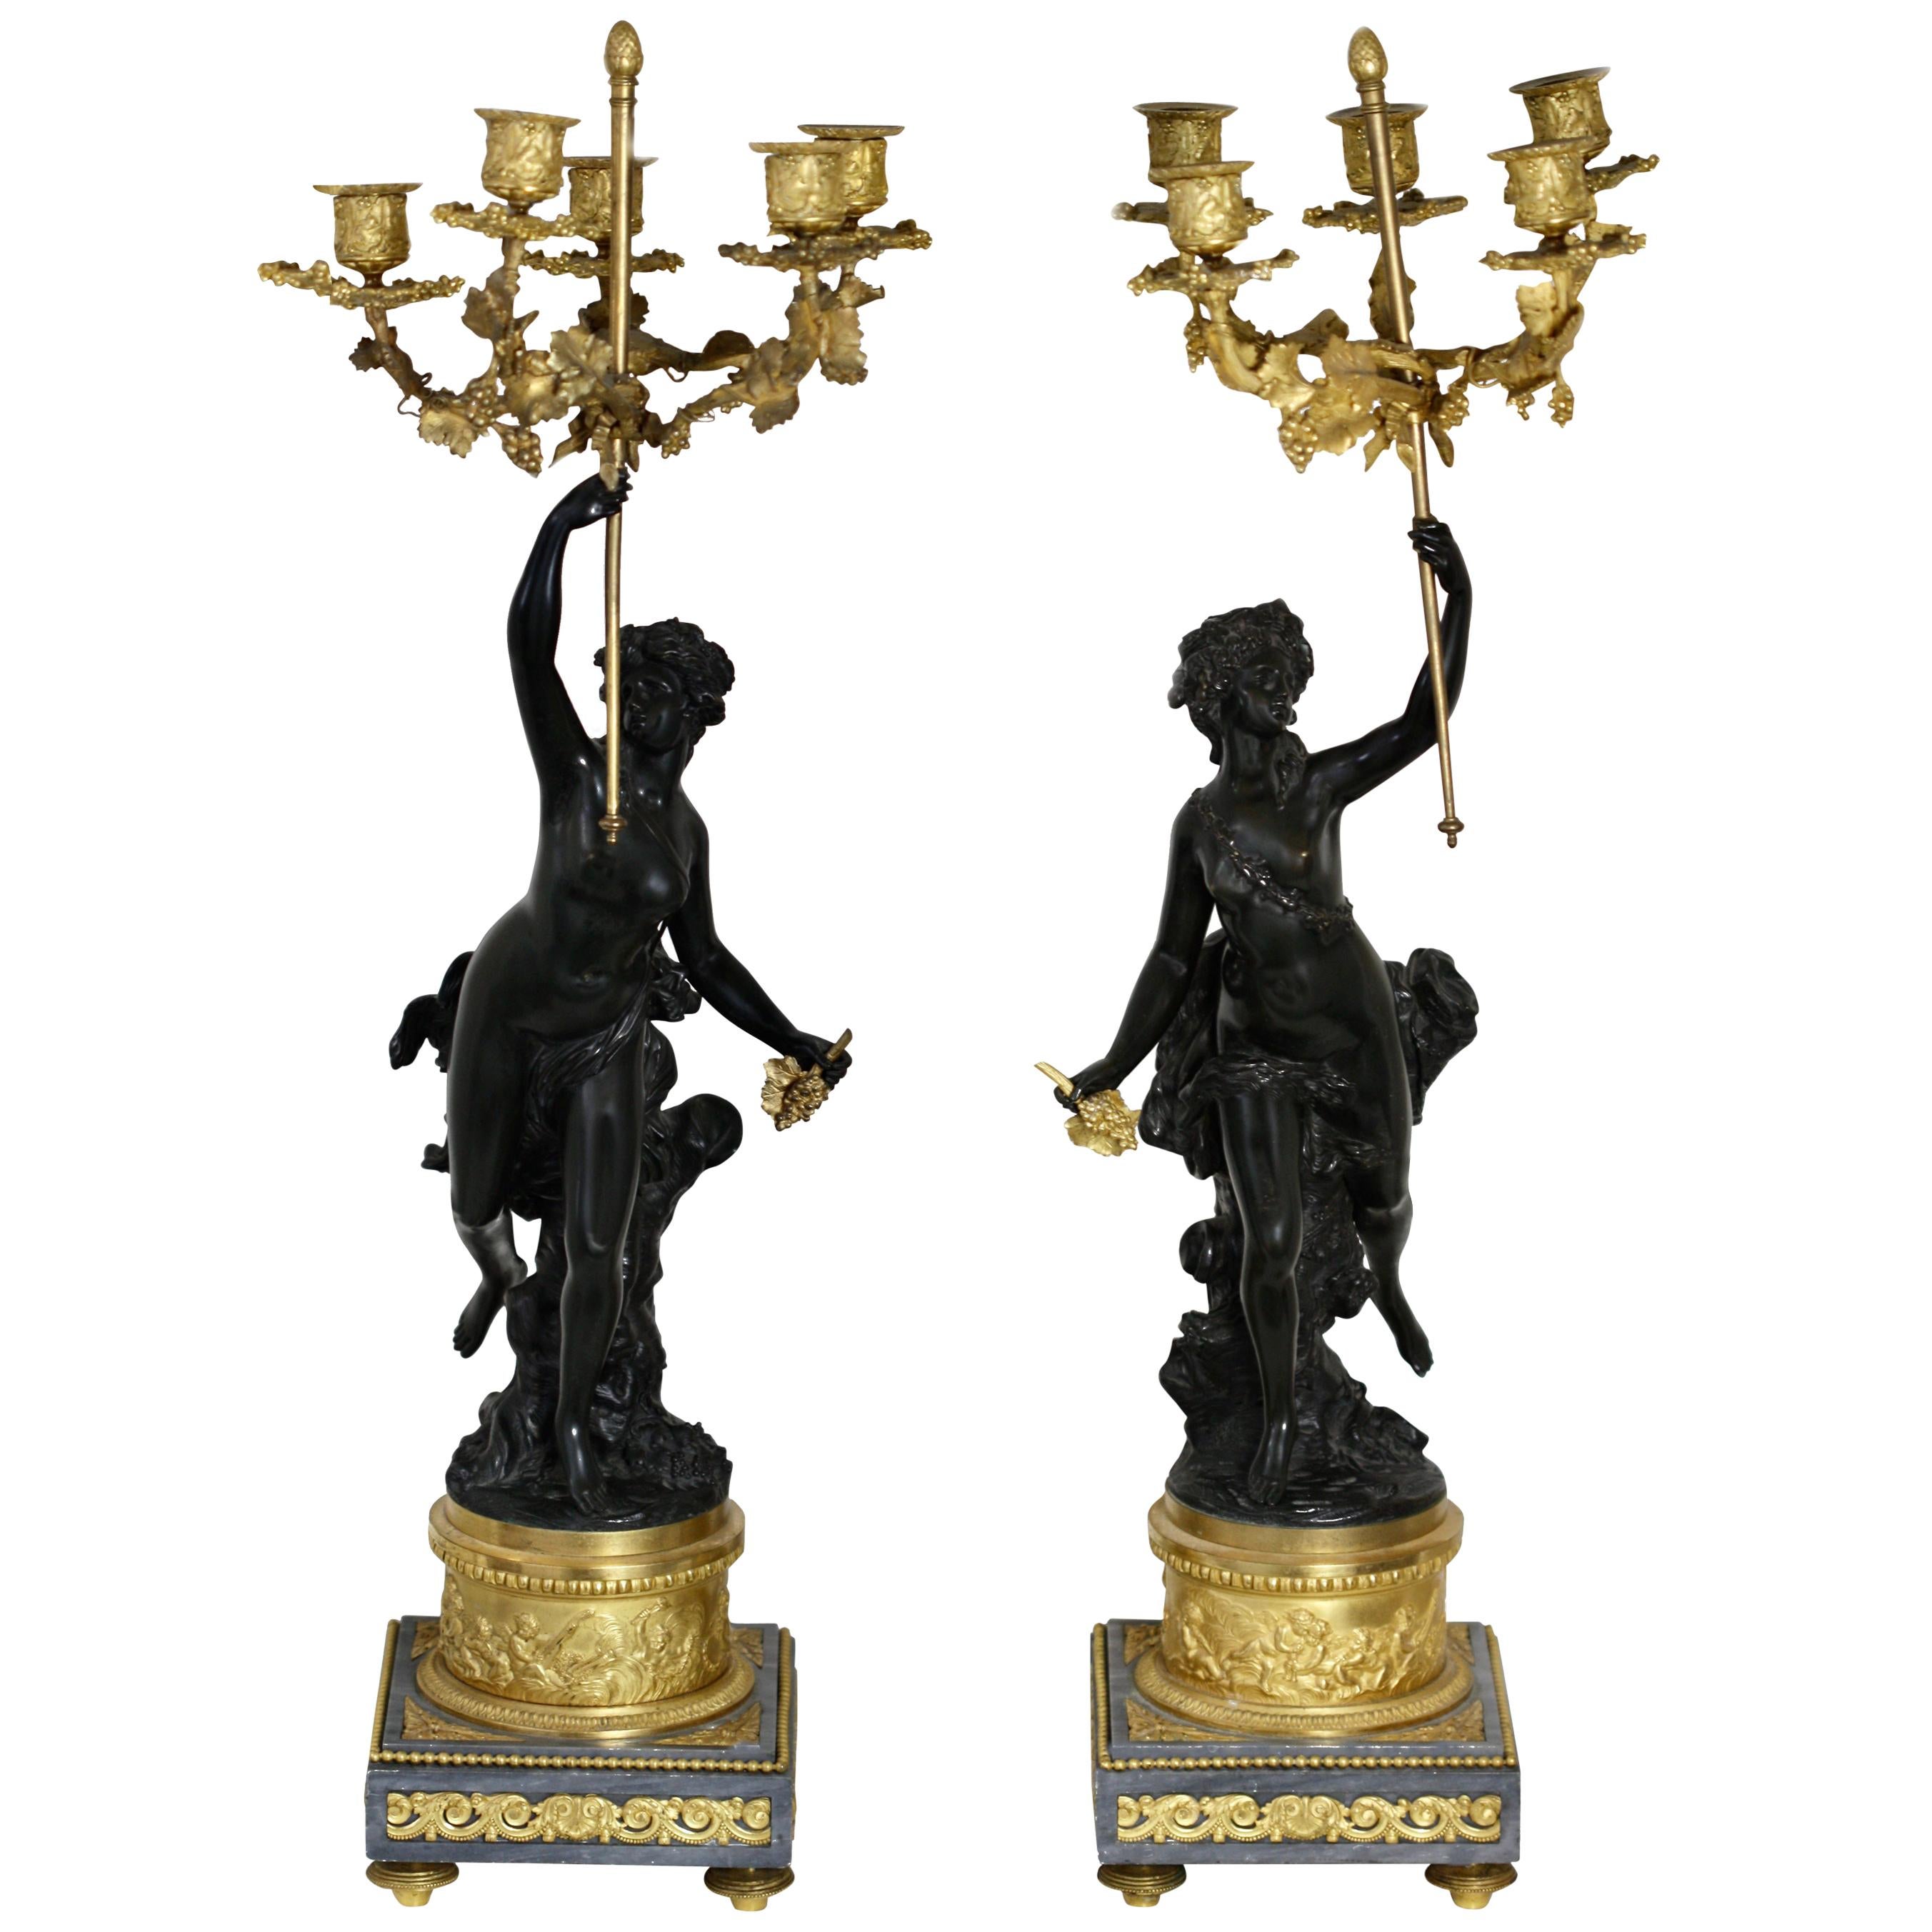 Fine Pair of French Gilt and Patinated-Bronze and Marble Candelabra